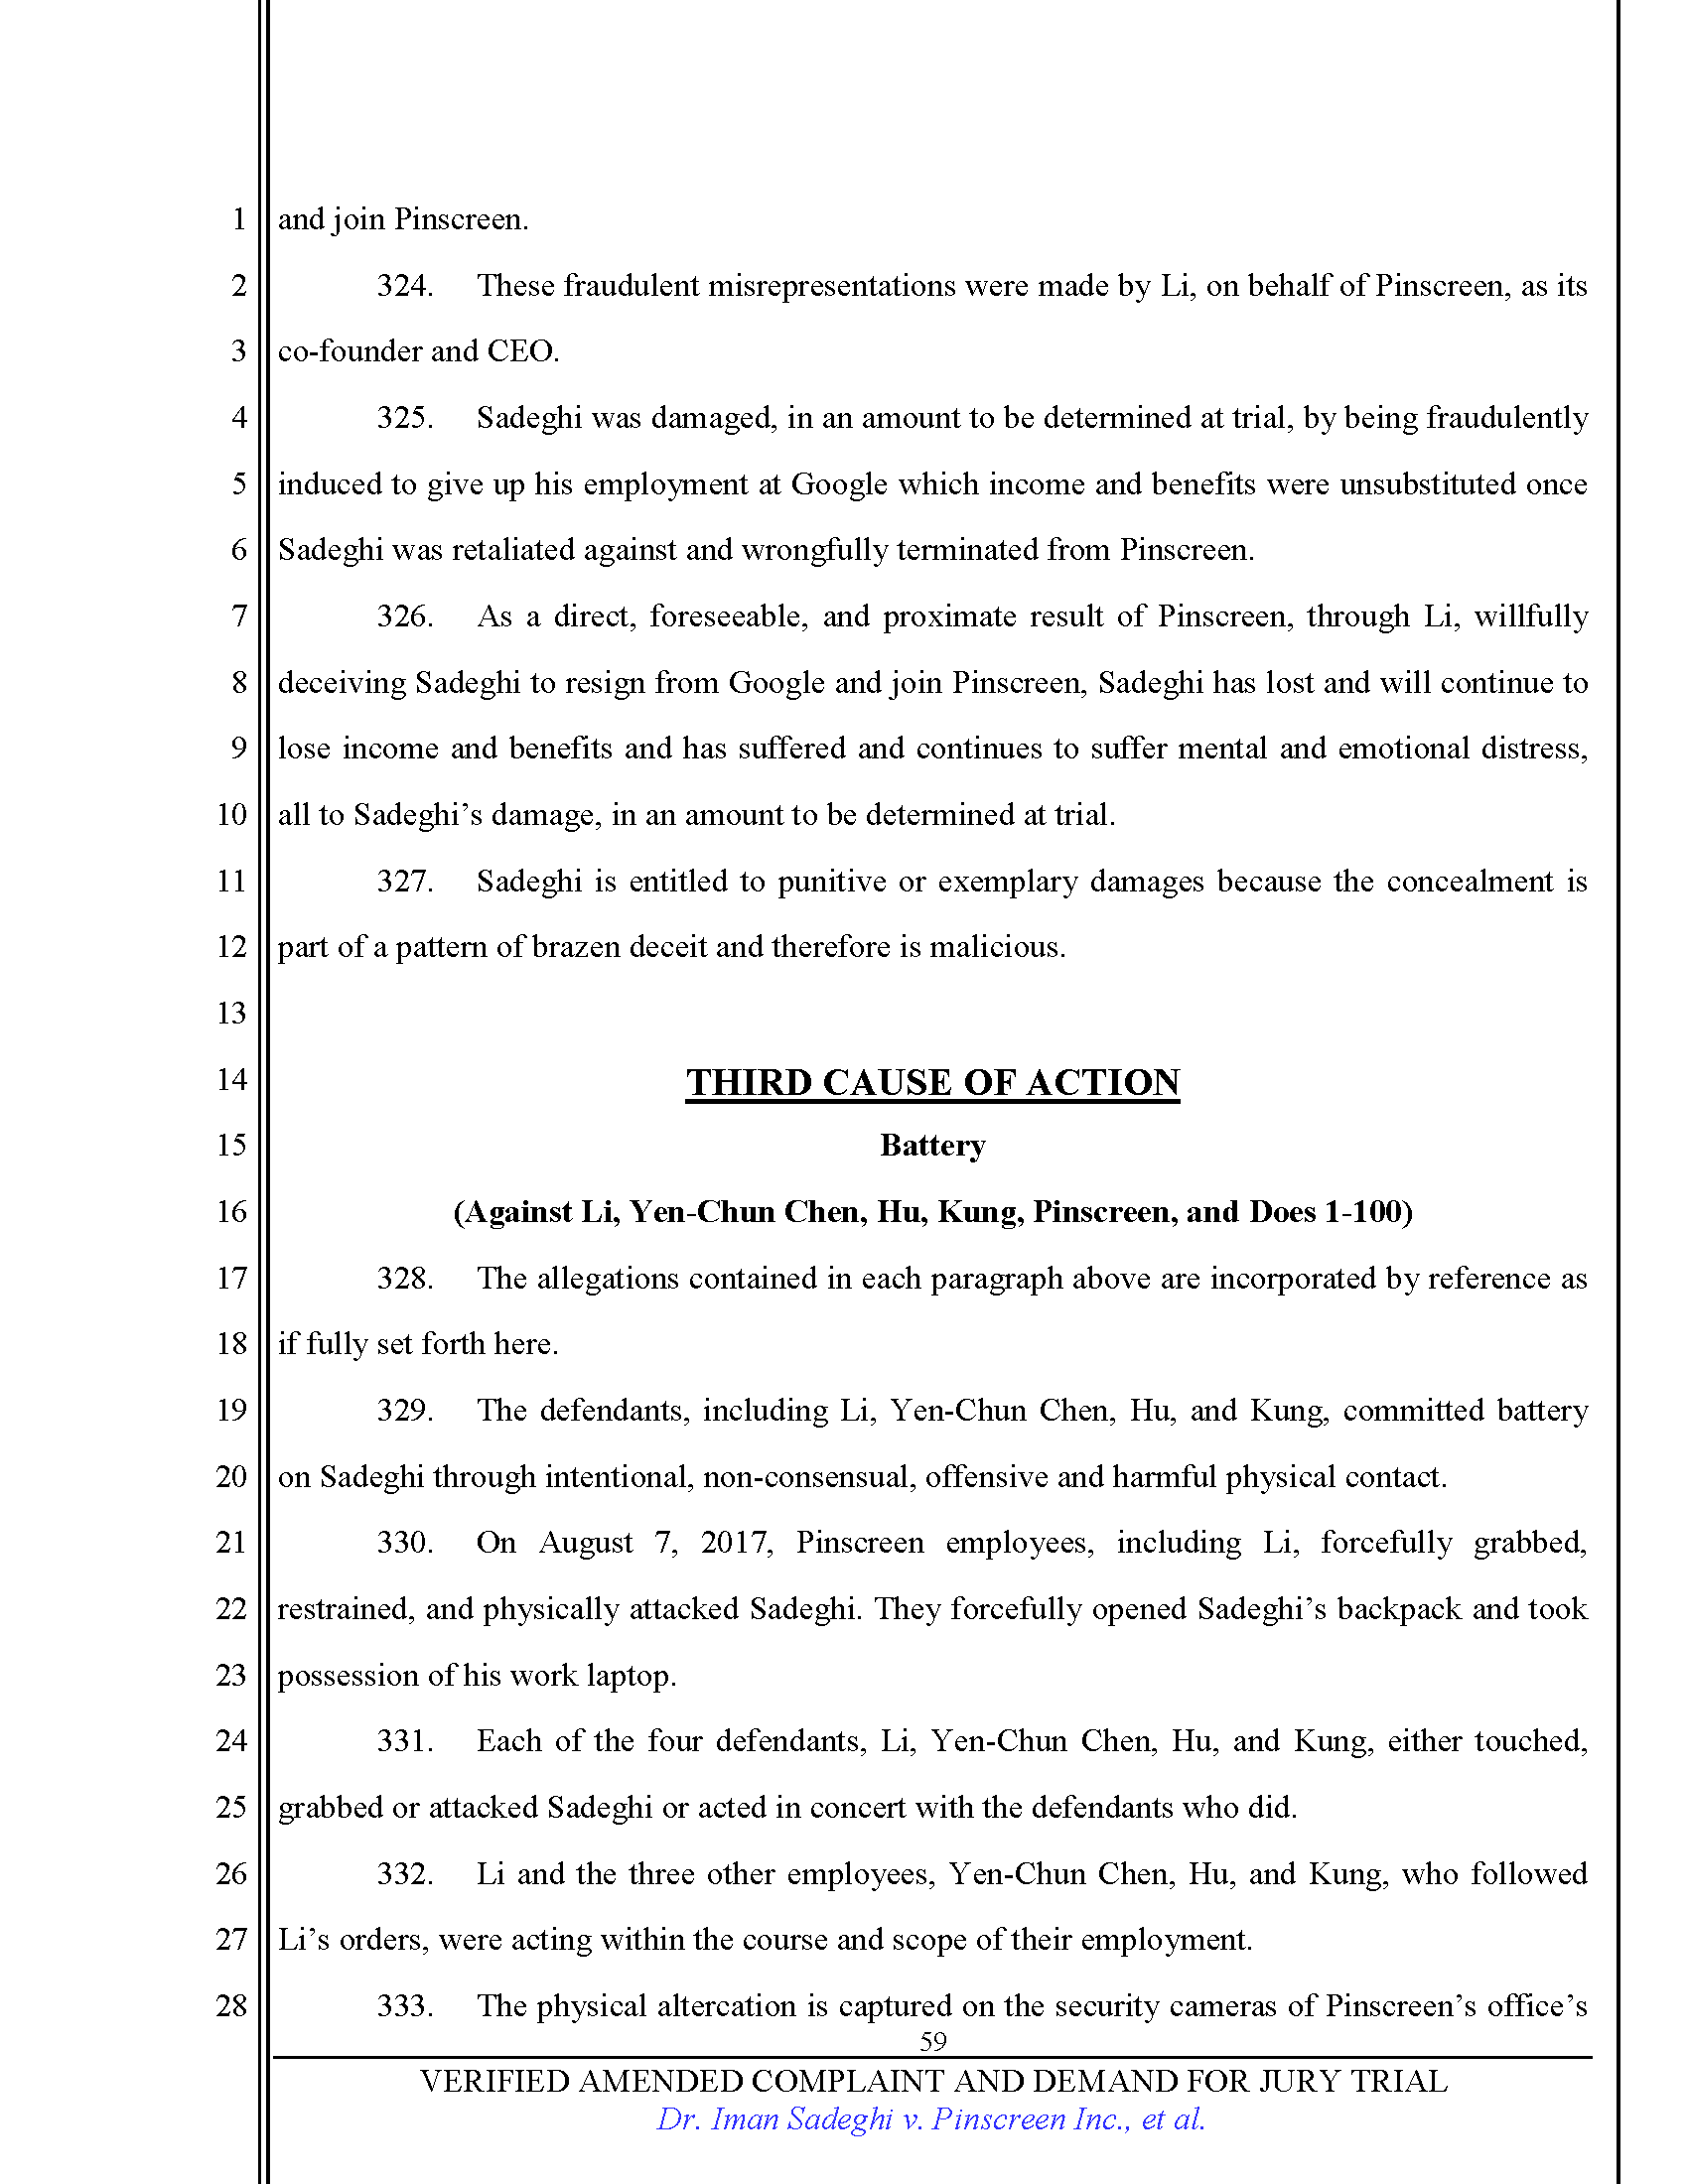 First Amended Complaint (FAC) Page 59